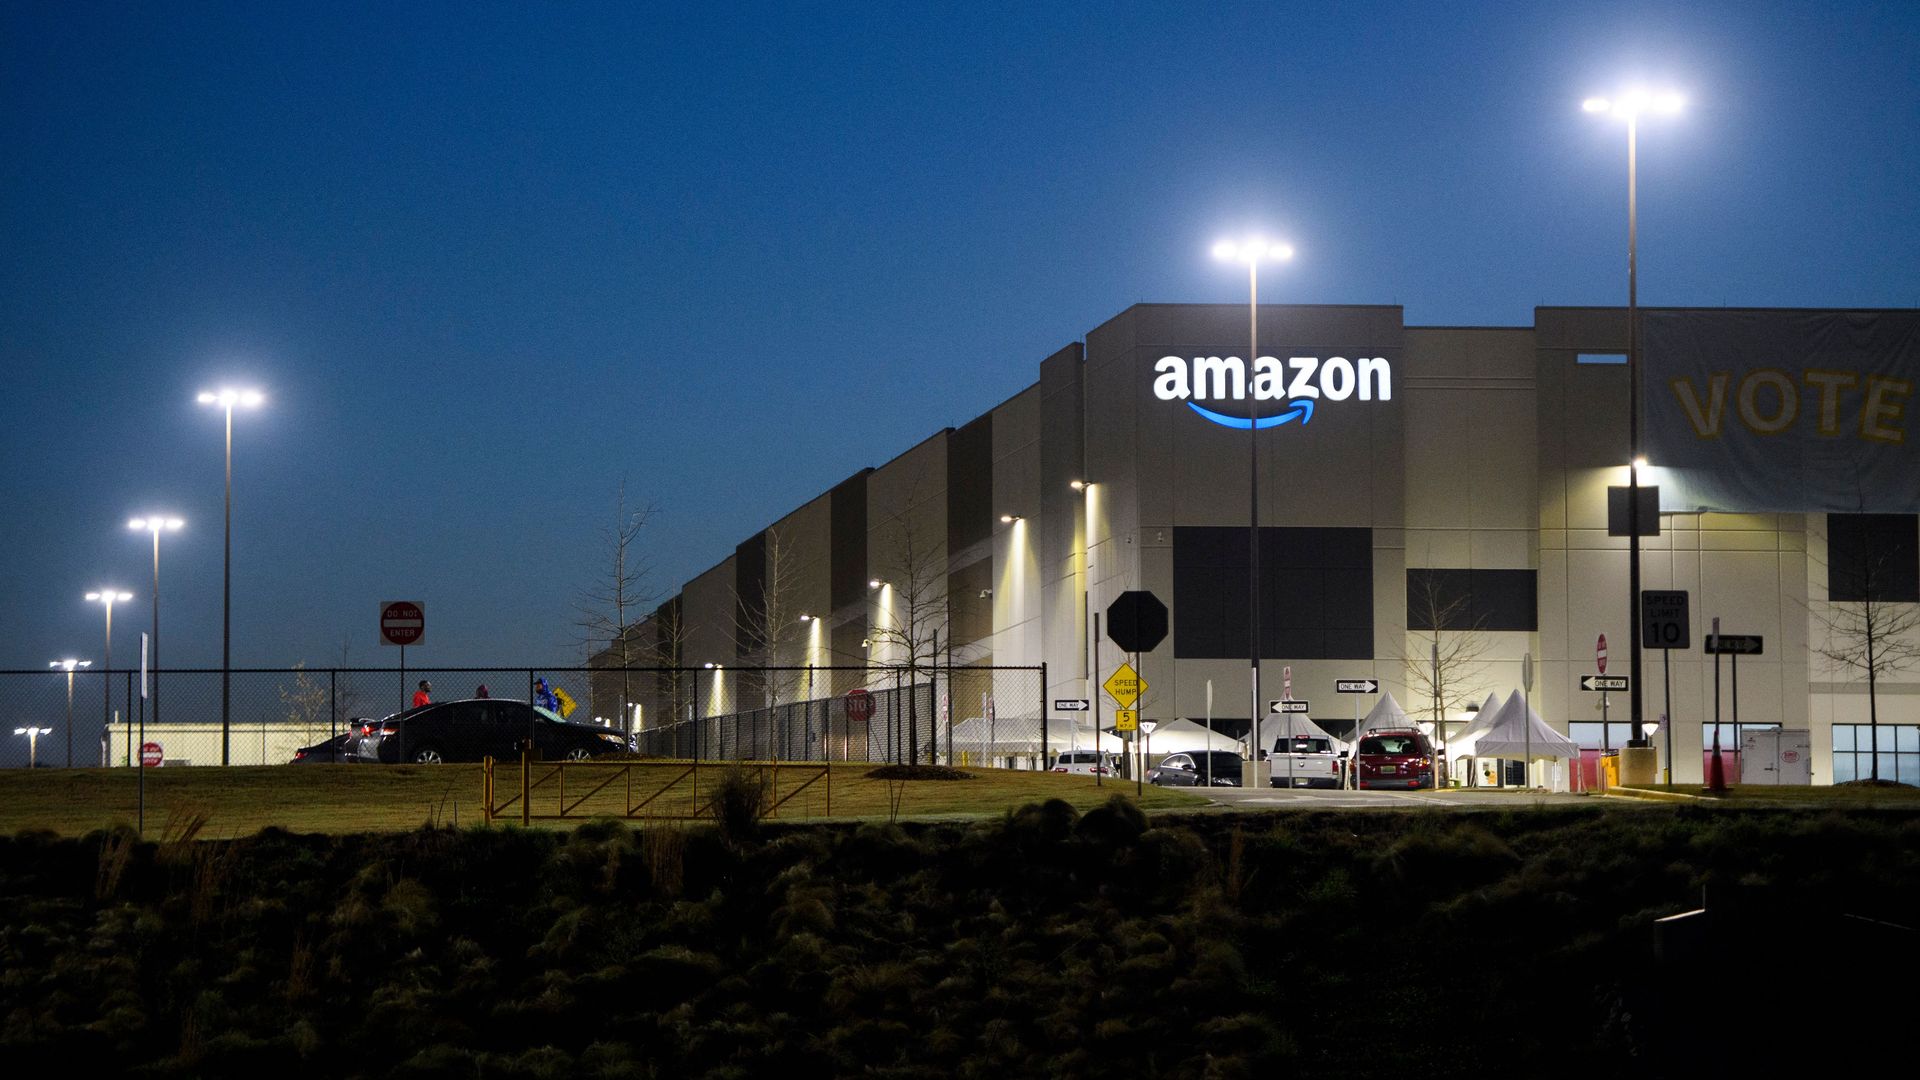 The Amazon.com, Inc. BHM1 fulfillment center is seen before sunrise on March 29, 2021 in Bessemer, Alabama. 